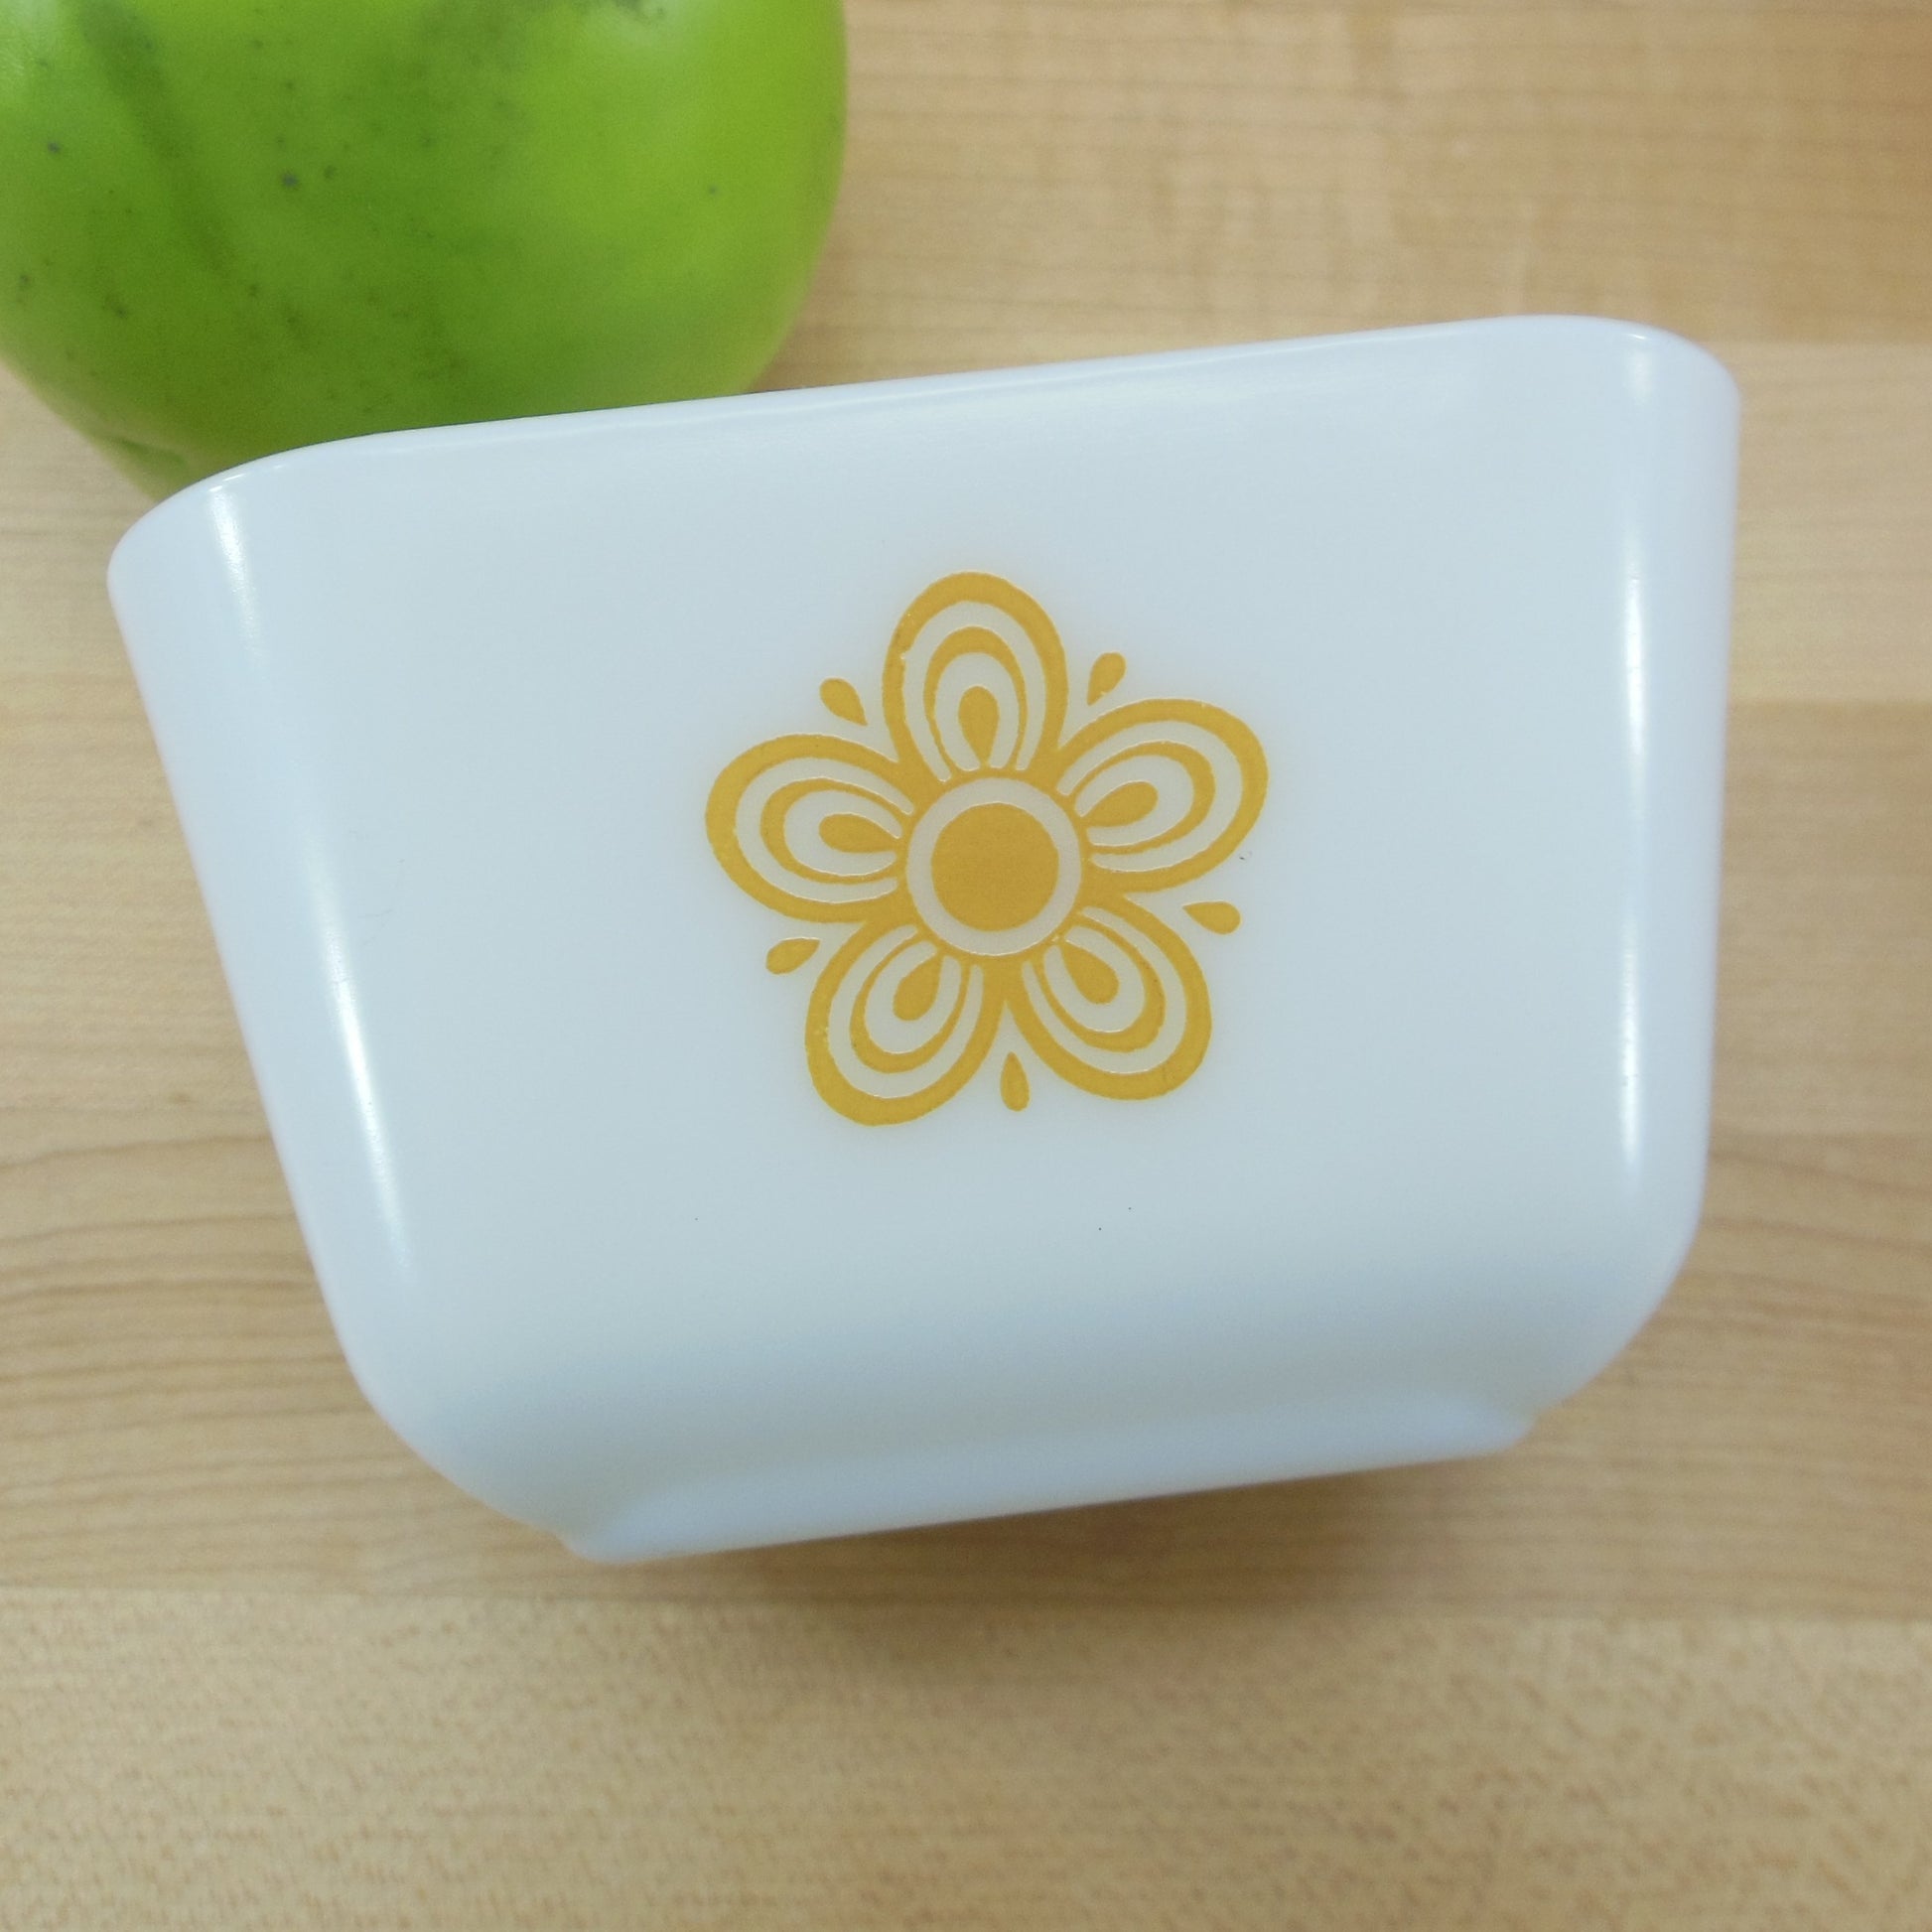 Pyrex Glass 501 Refrigerator Dish No Lid - Your Choice Gold Butterfly